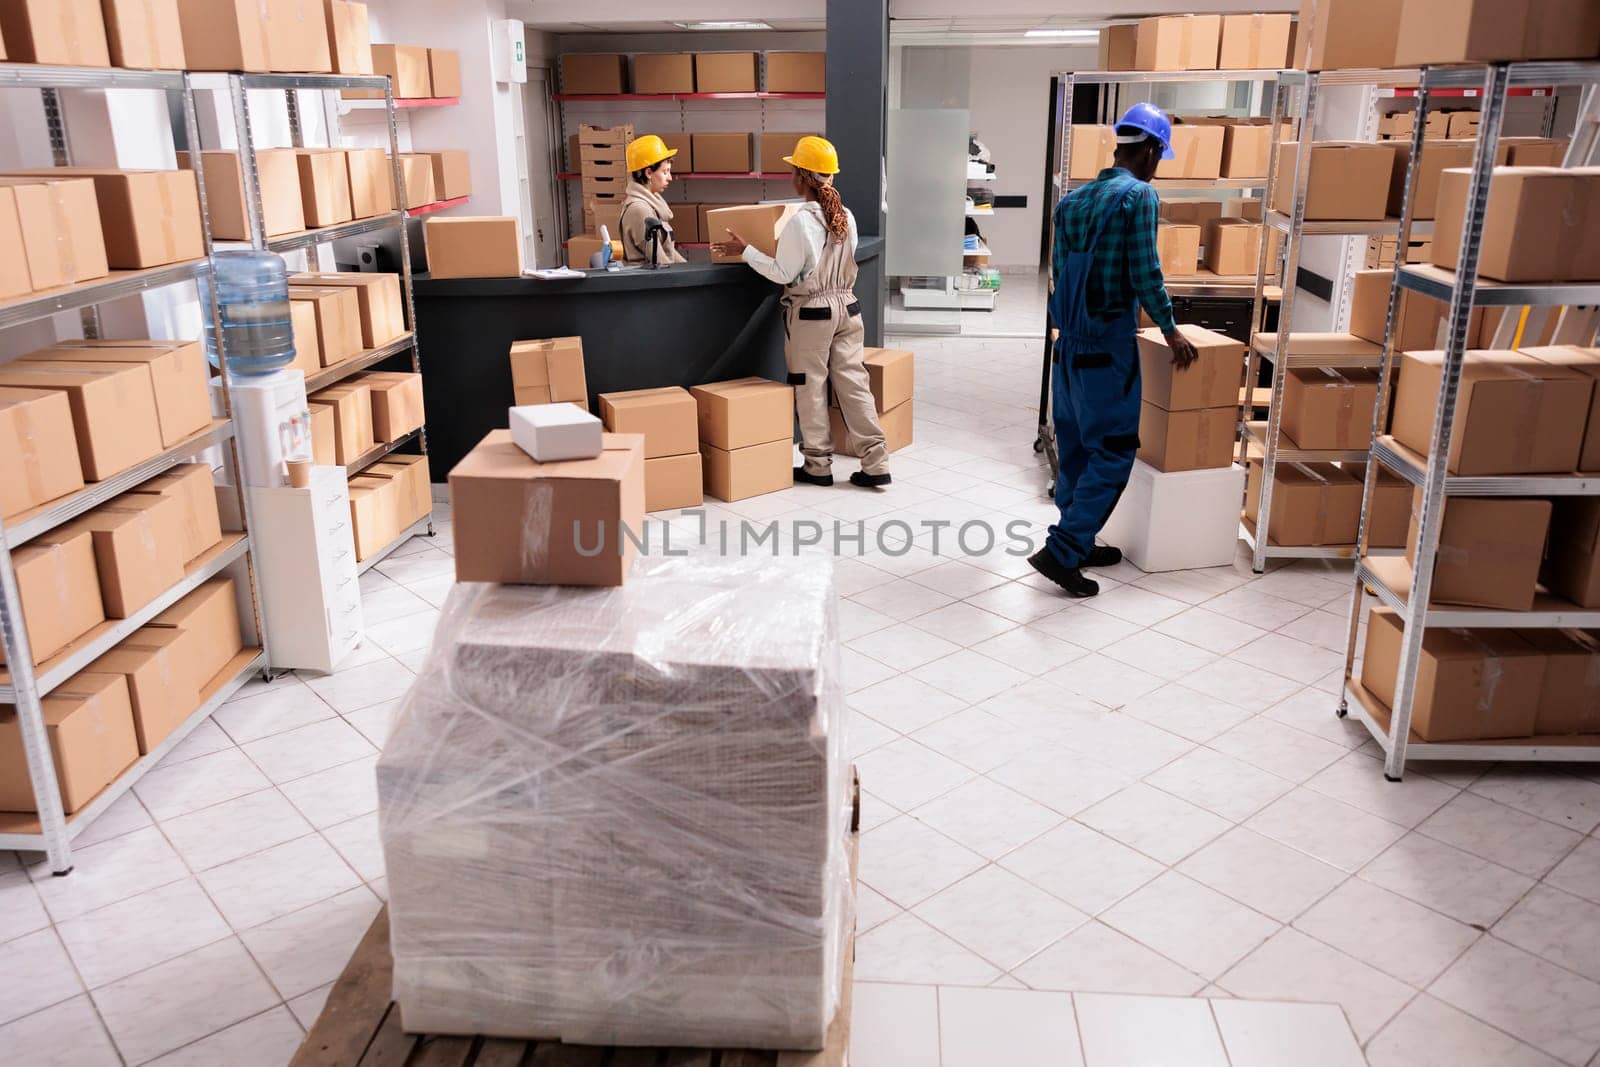 Post office storage workers managing parcels delivery by DCStudio